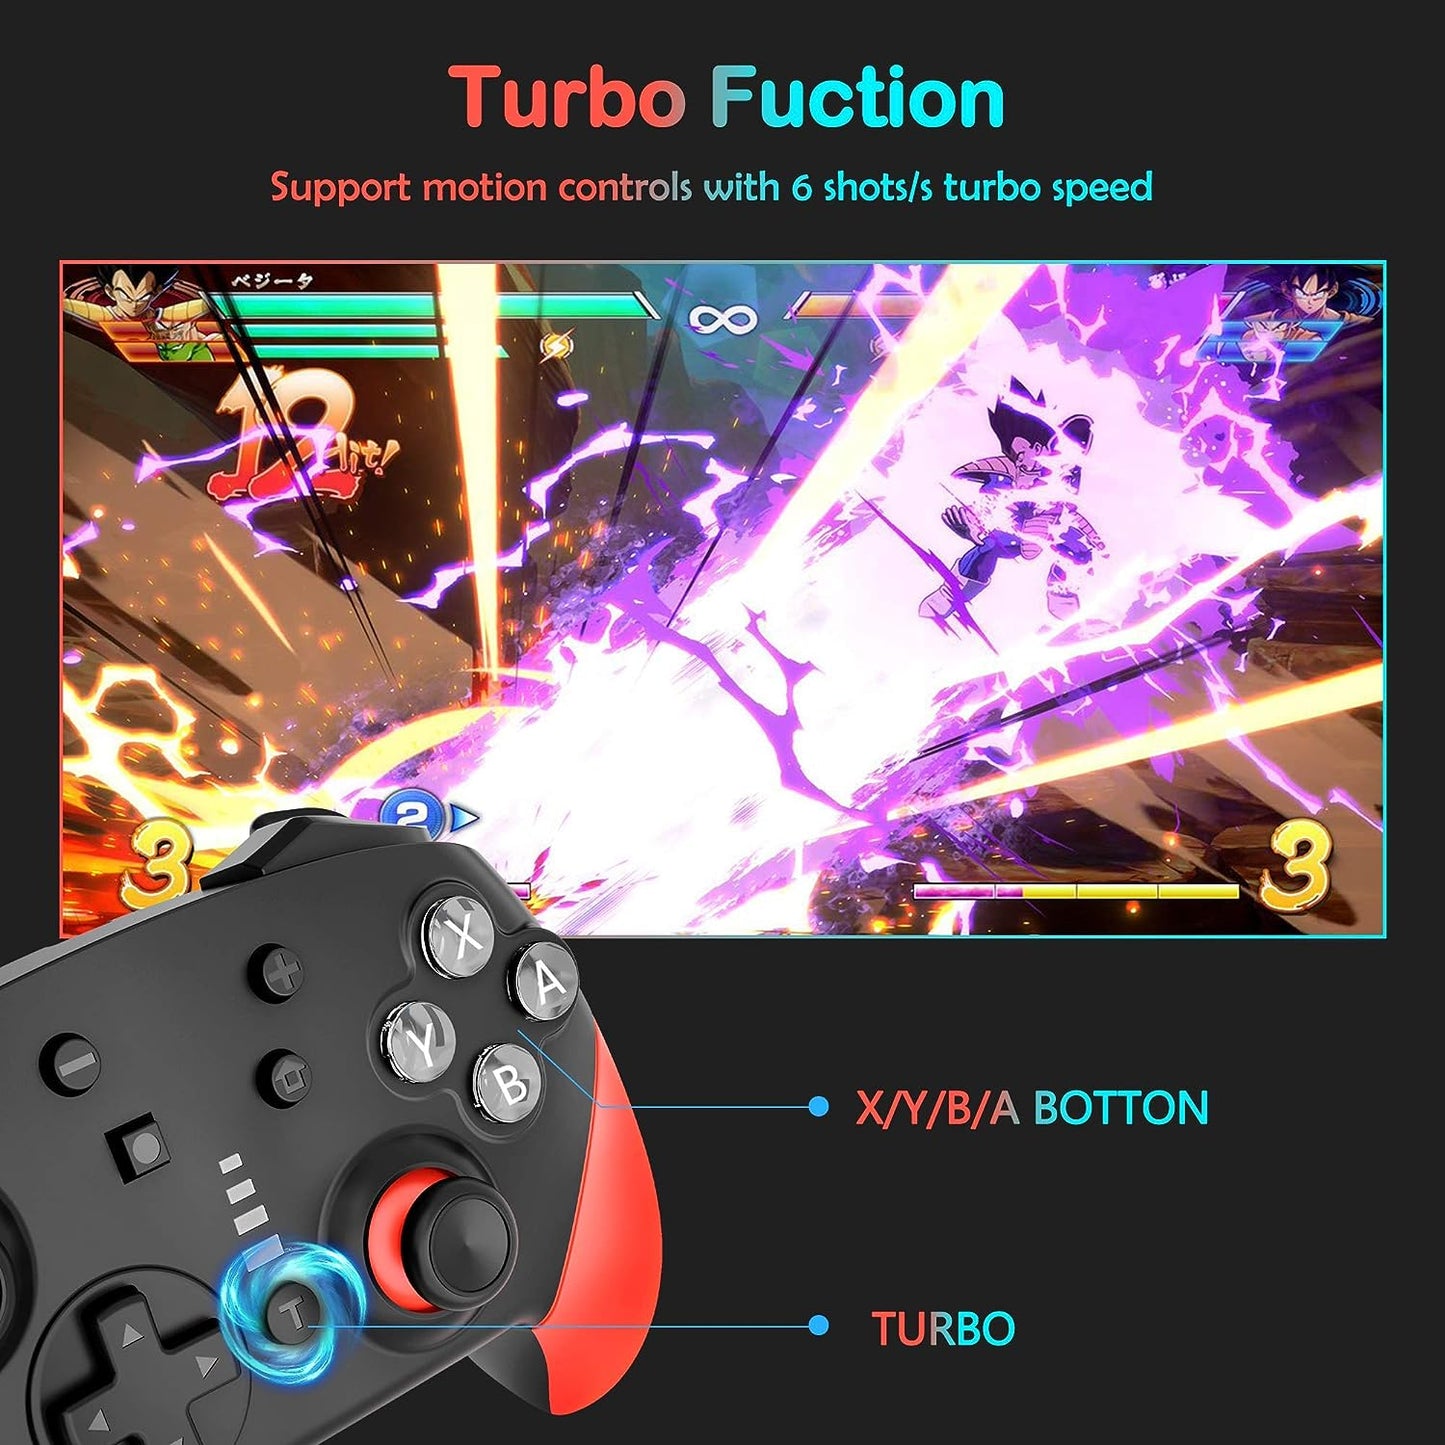 Wireless Pro Controllers for Nintendo Switch, Professional Controller Remote Gamepad Joystick for Switch Controller with Turbo Function, Double Vibration, and 6 Axis-Gyro